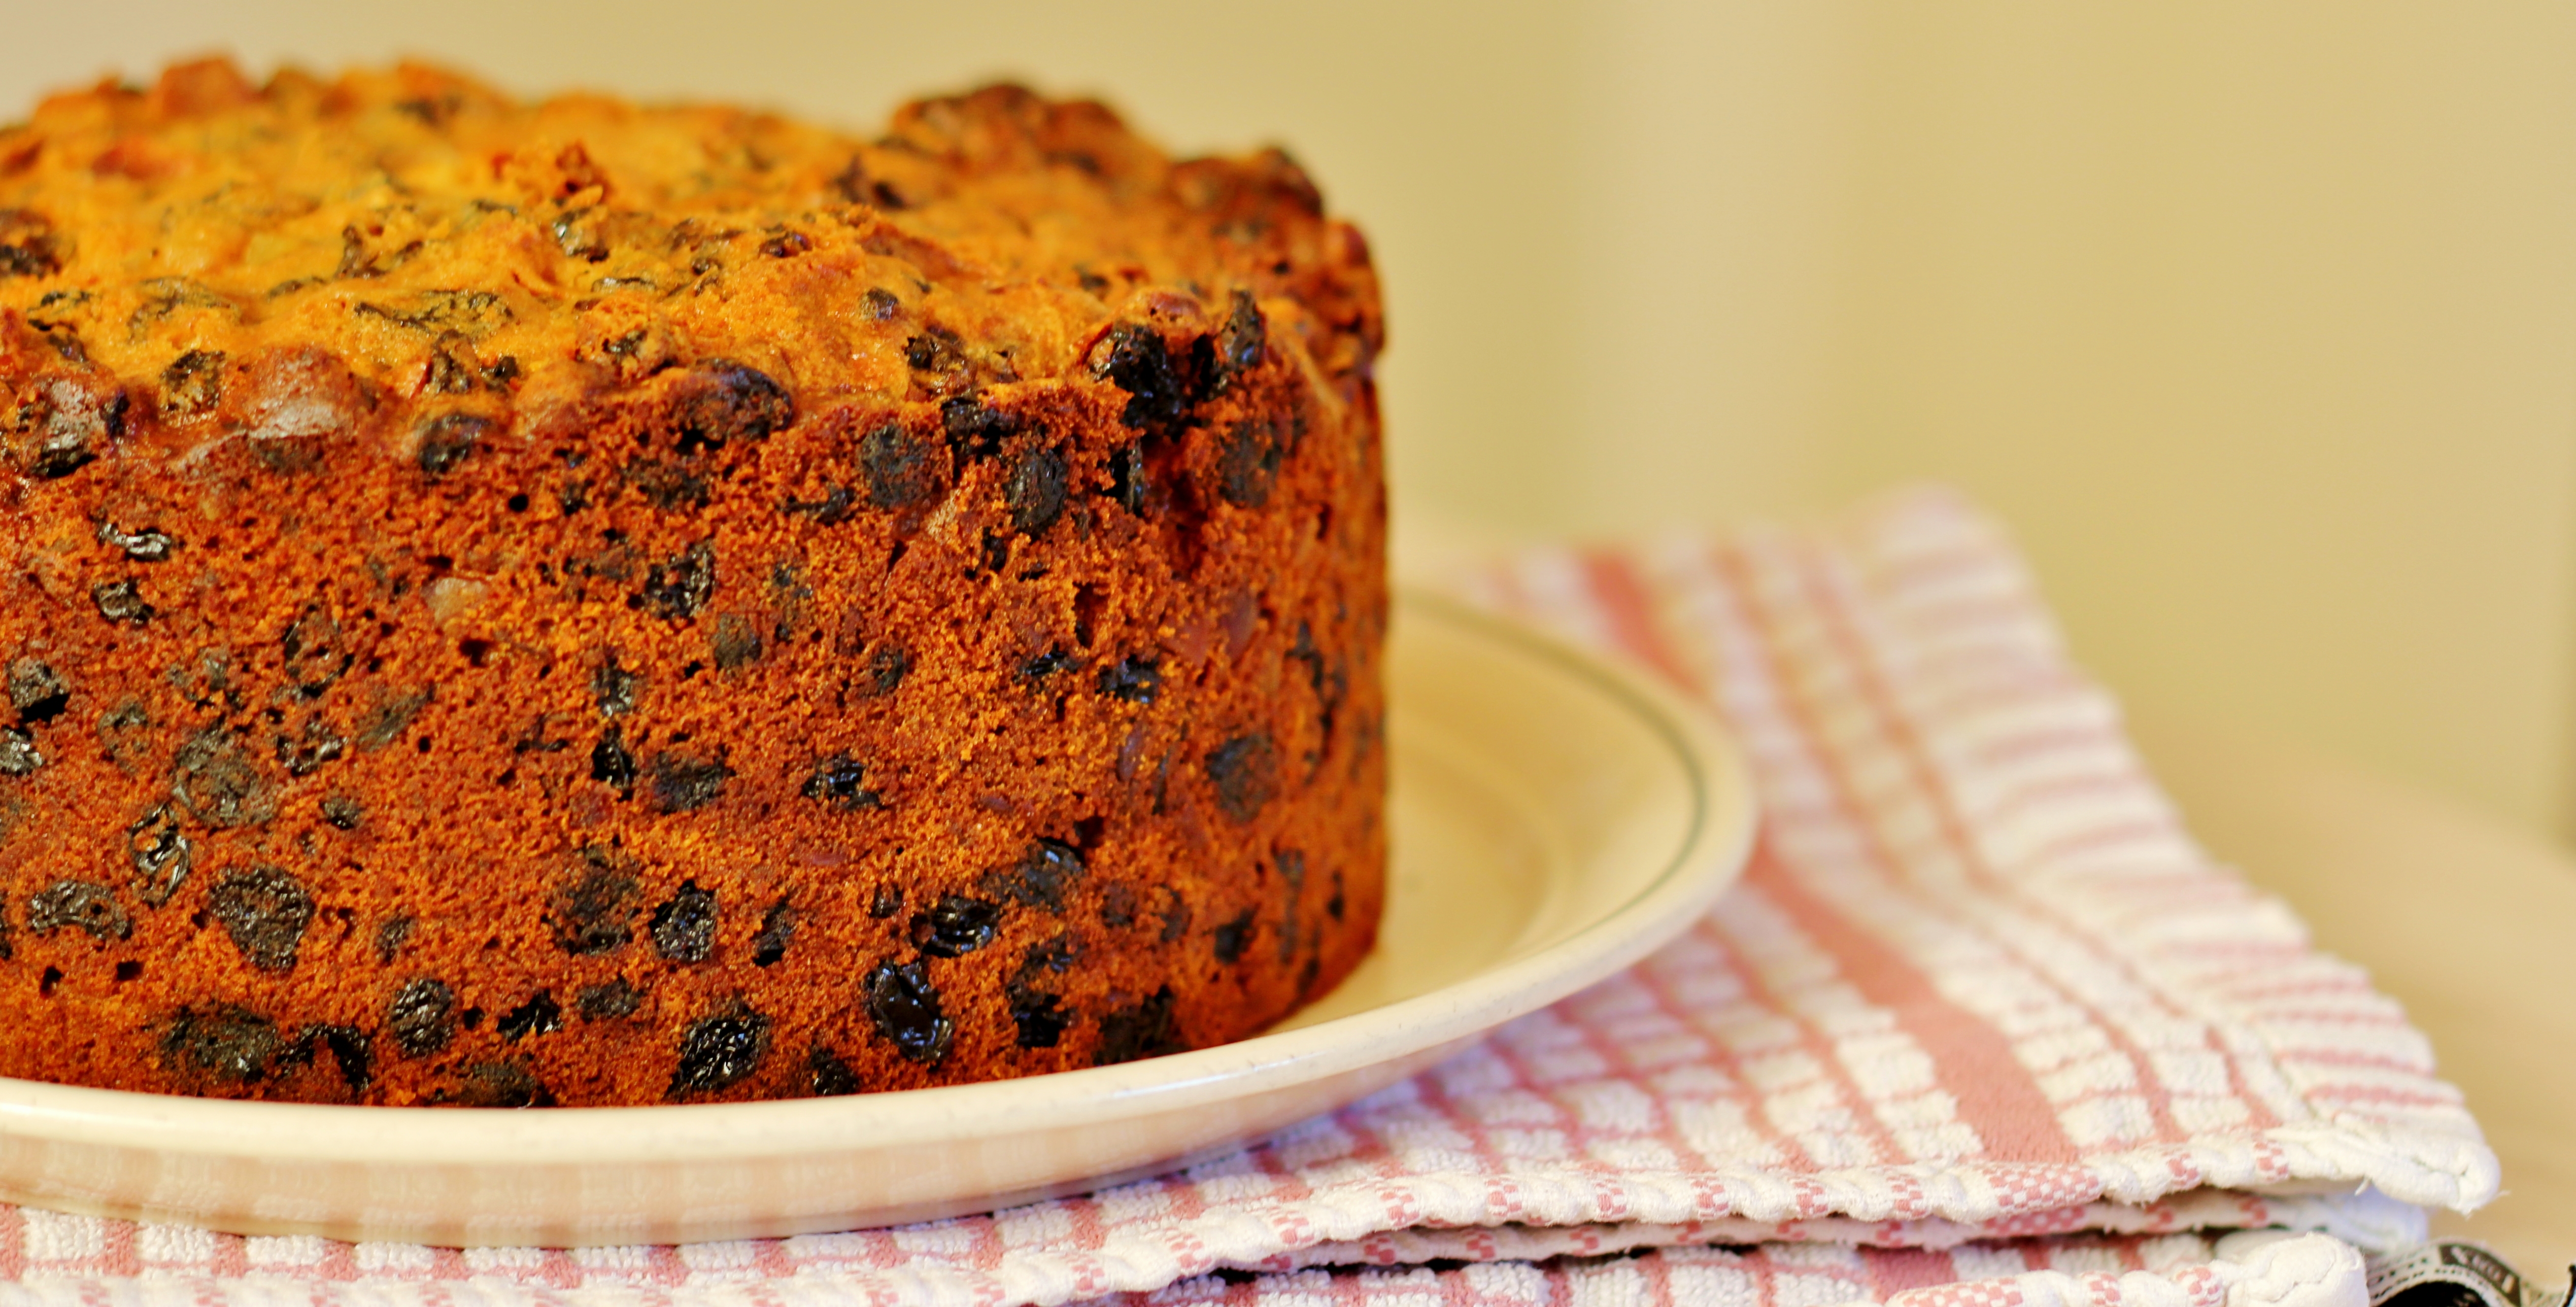 A Christmas cake sits on a plate, ready to be iced.